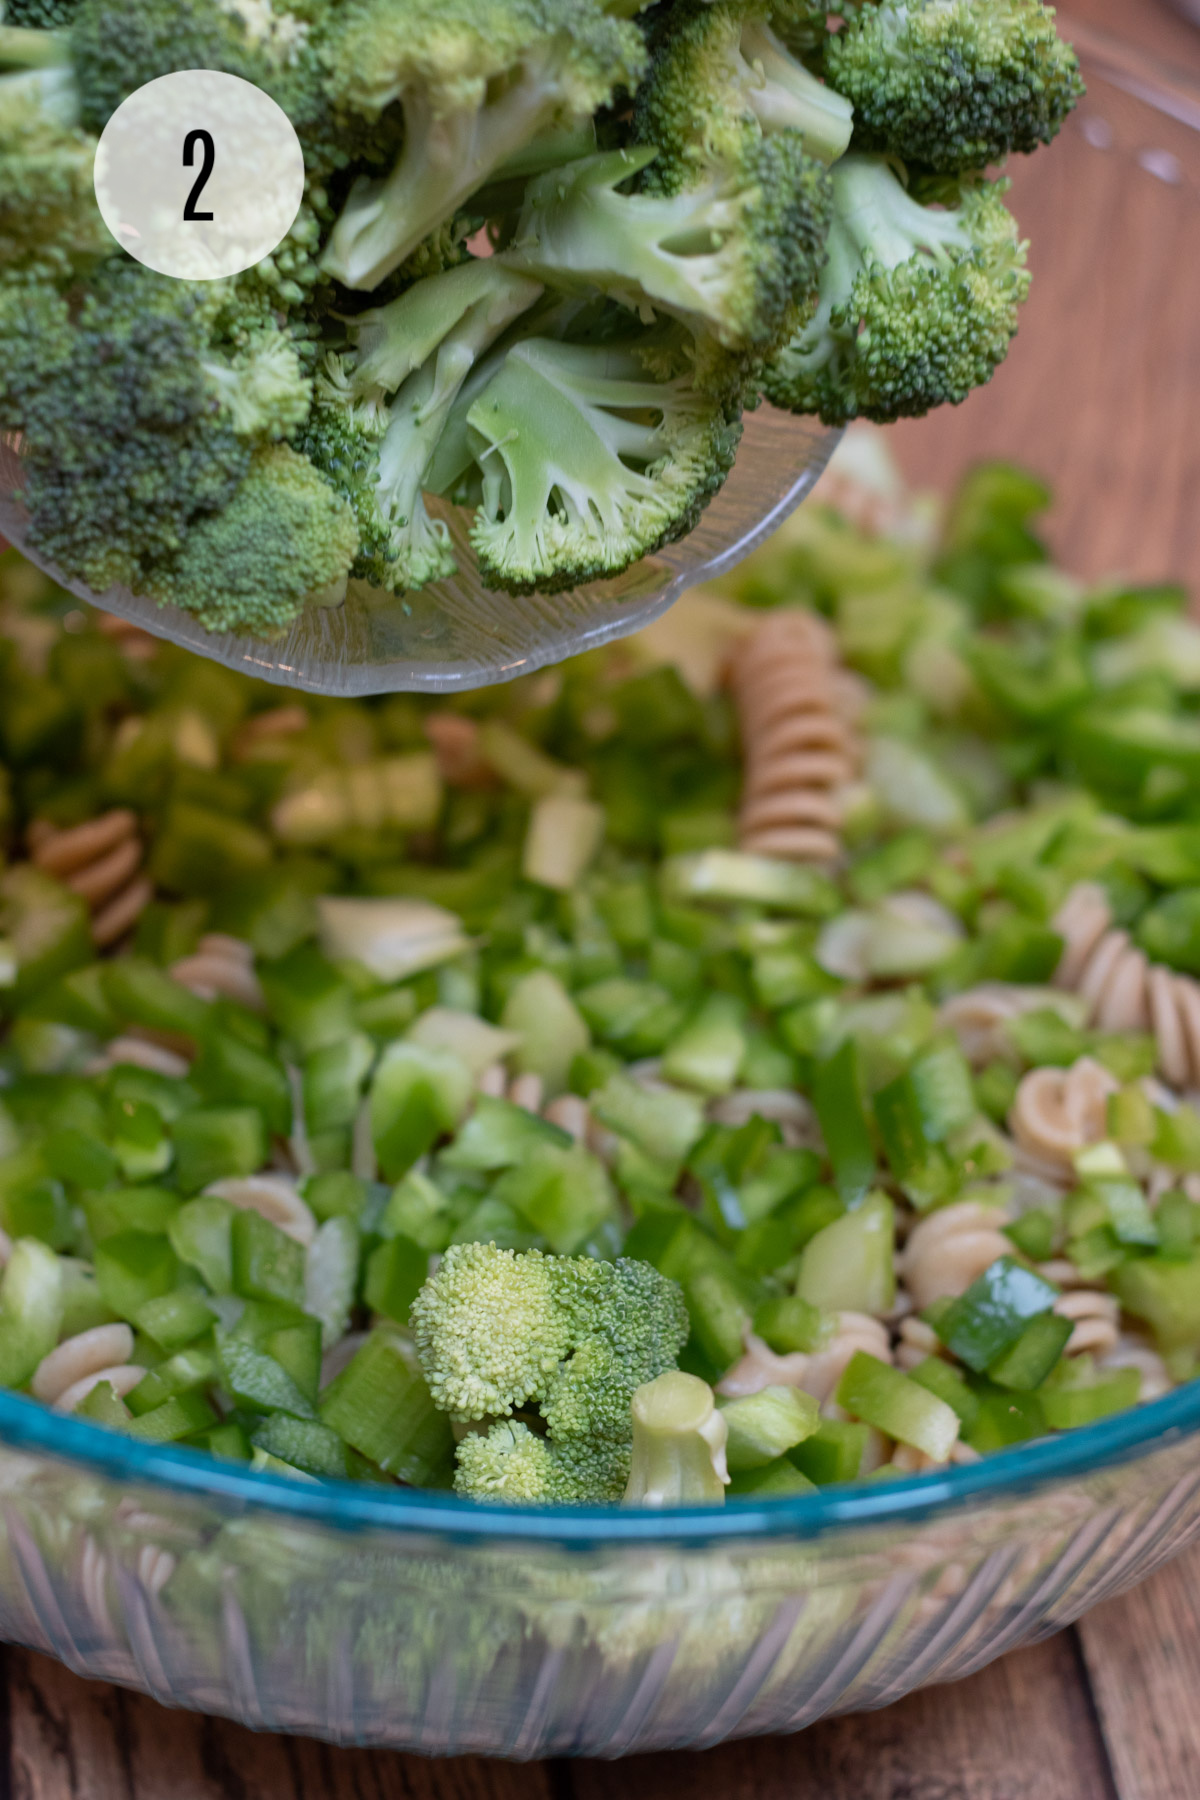 Small bowl of chopped broccoli being added to larger bowl with broccoli ham pasta salad ingredients including green bell pepper.  